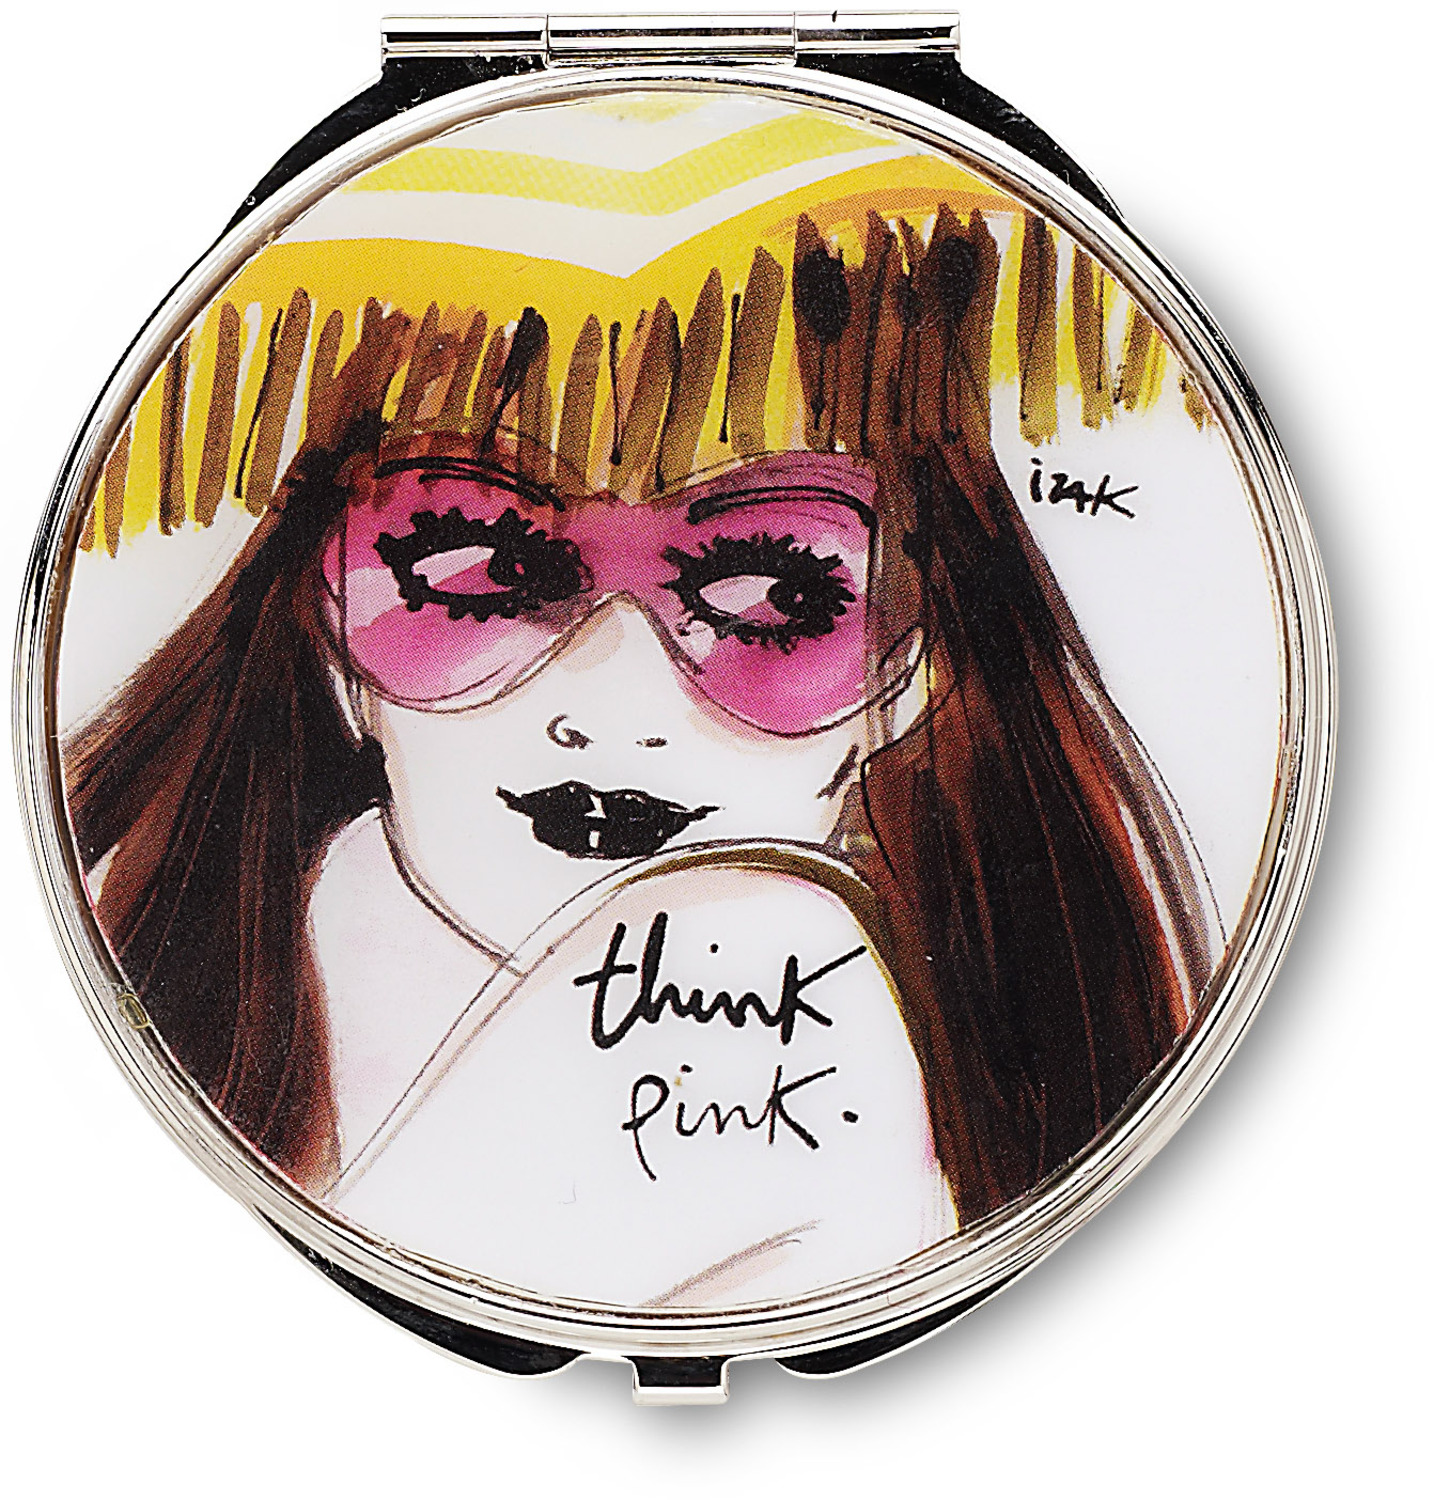 Think Pink by IZAK - Think Pink - 2.75" Compact Mirror